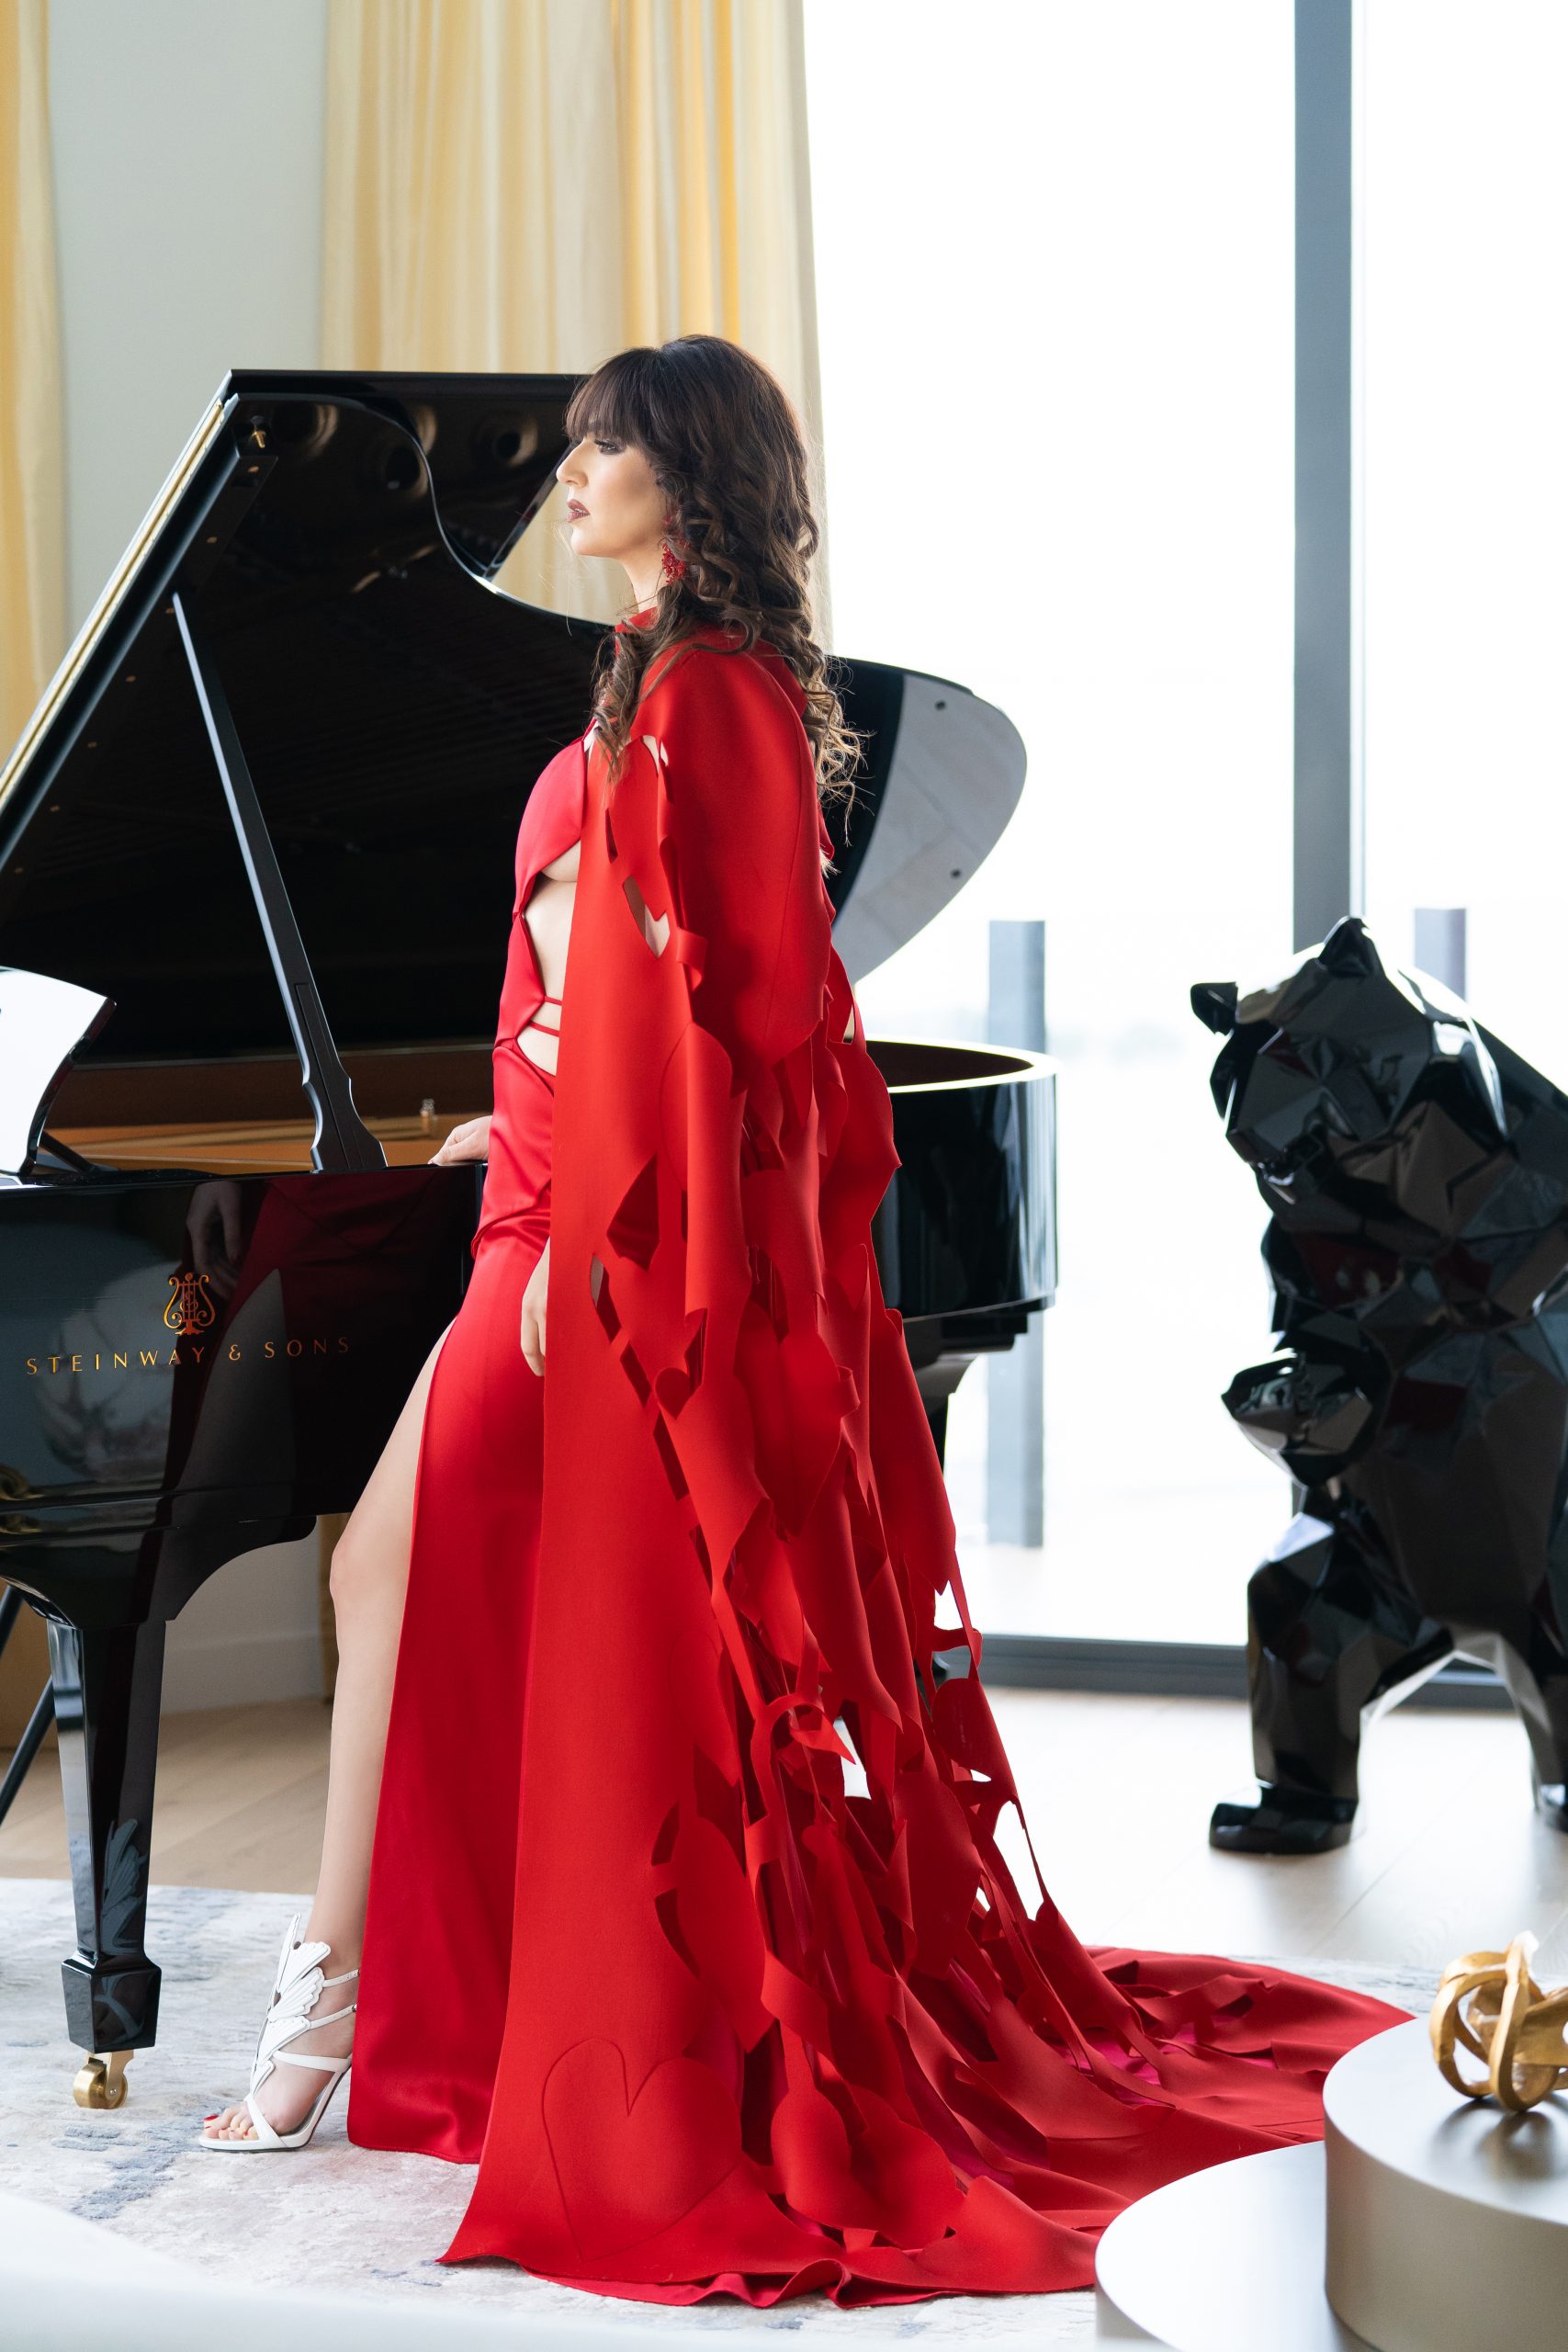 Radmila Lolly standing beside a Piano wearing a red Dress